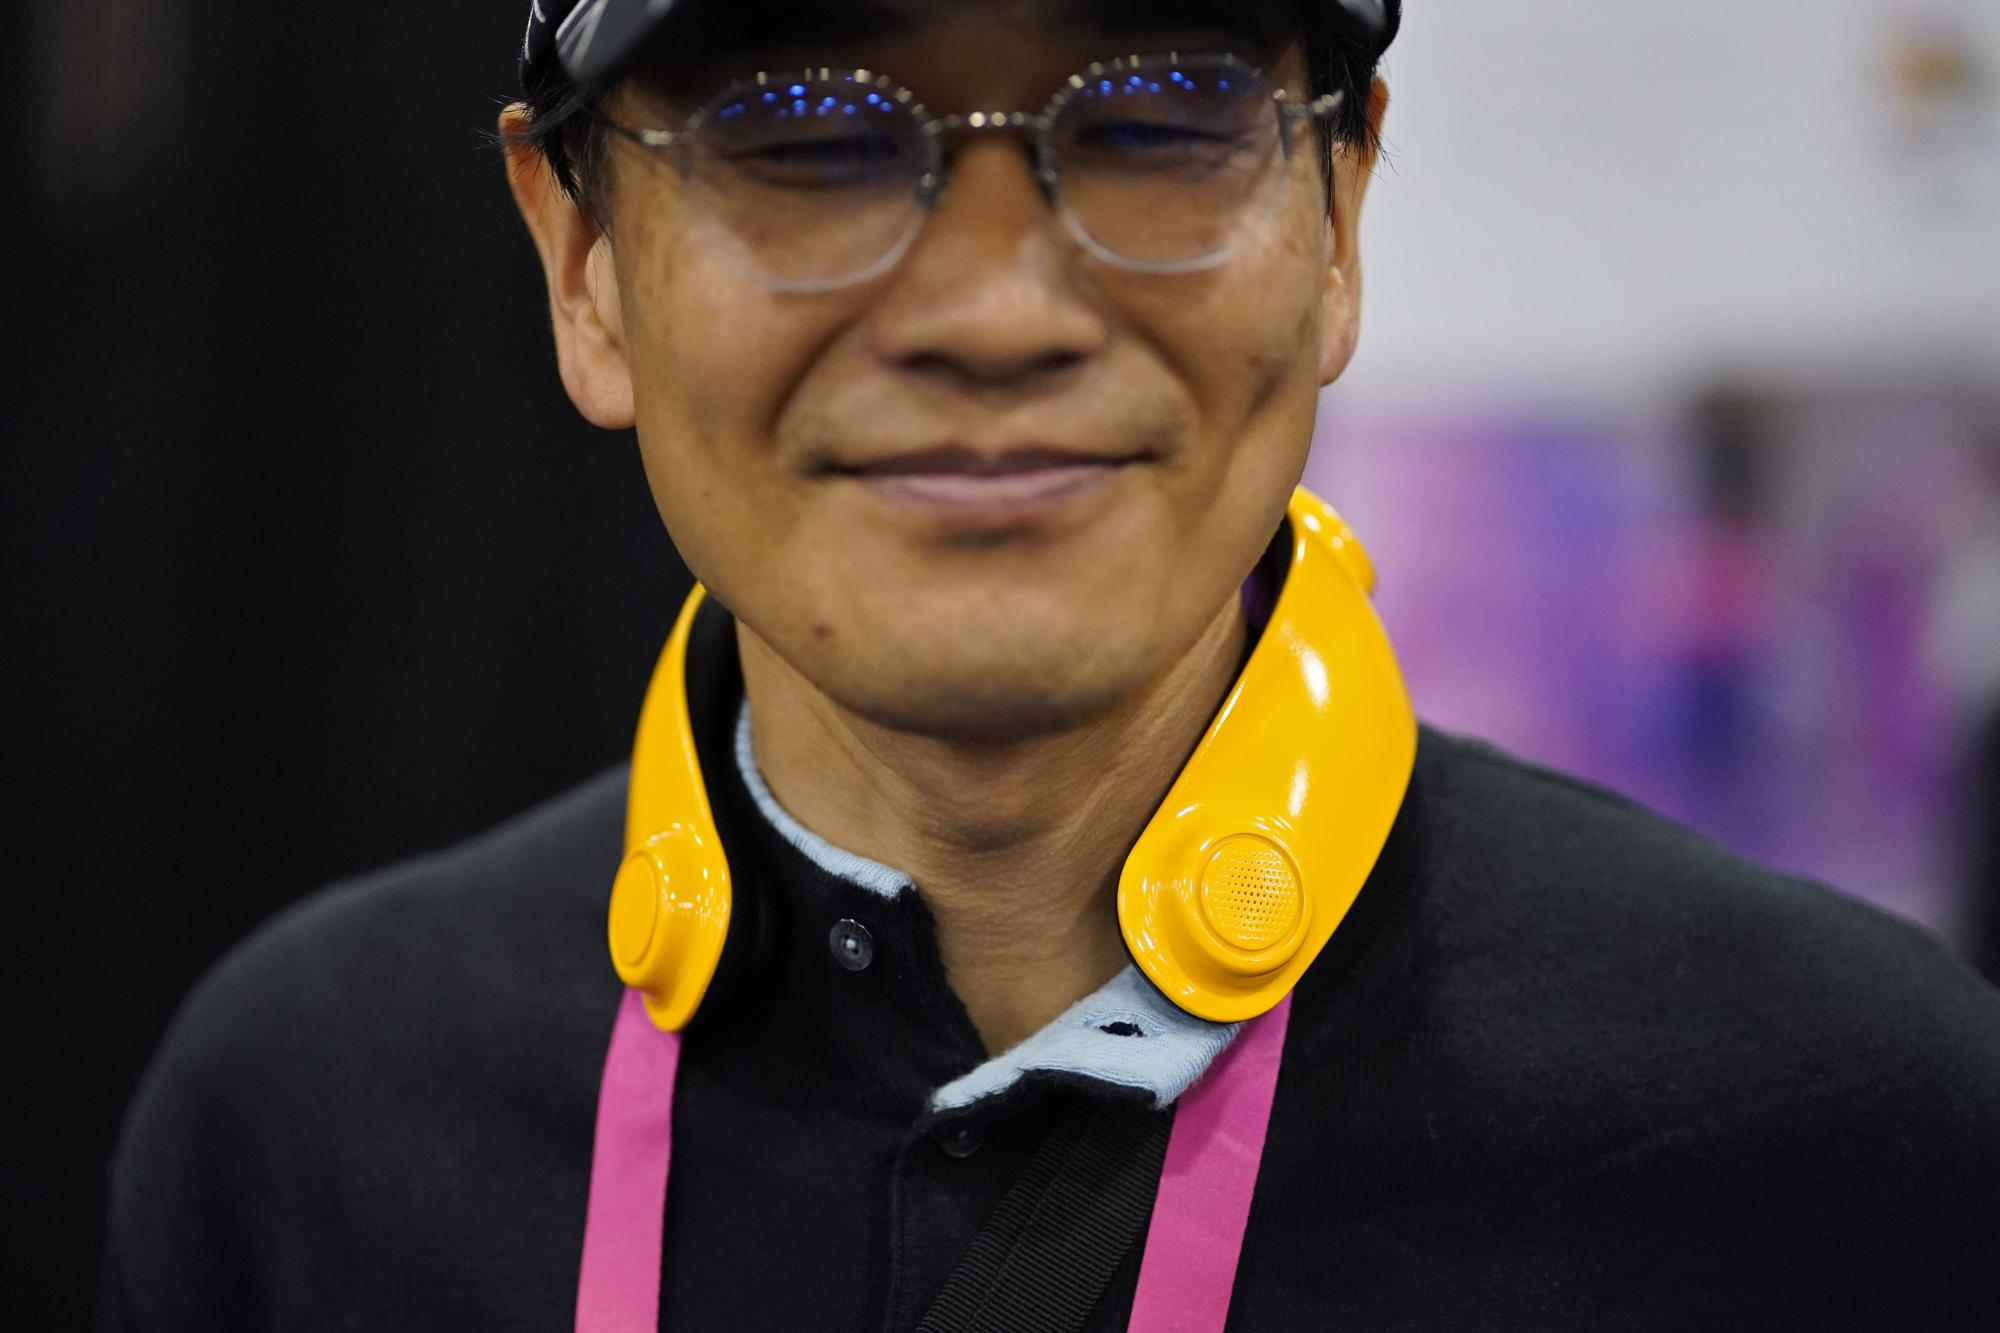 Exhibitor Toru Yamanaka wears a Loovic augmented reality device during CES Unveiled before the start of the CES tech show, Tuesday, Jan. 3, 2023, in Las Vegas. The IoT device, worn around the neck, uses tactile notifications and bone conduction audio to help guide the user without having to constantly look at a map app on their phone. (AP Photo/John Locher)